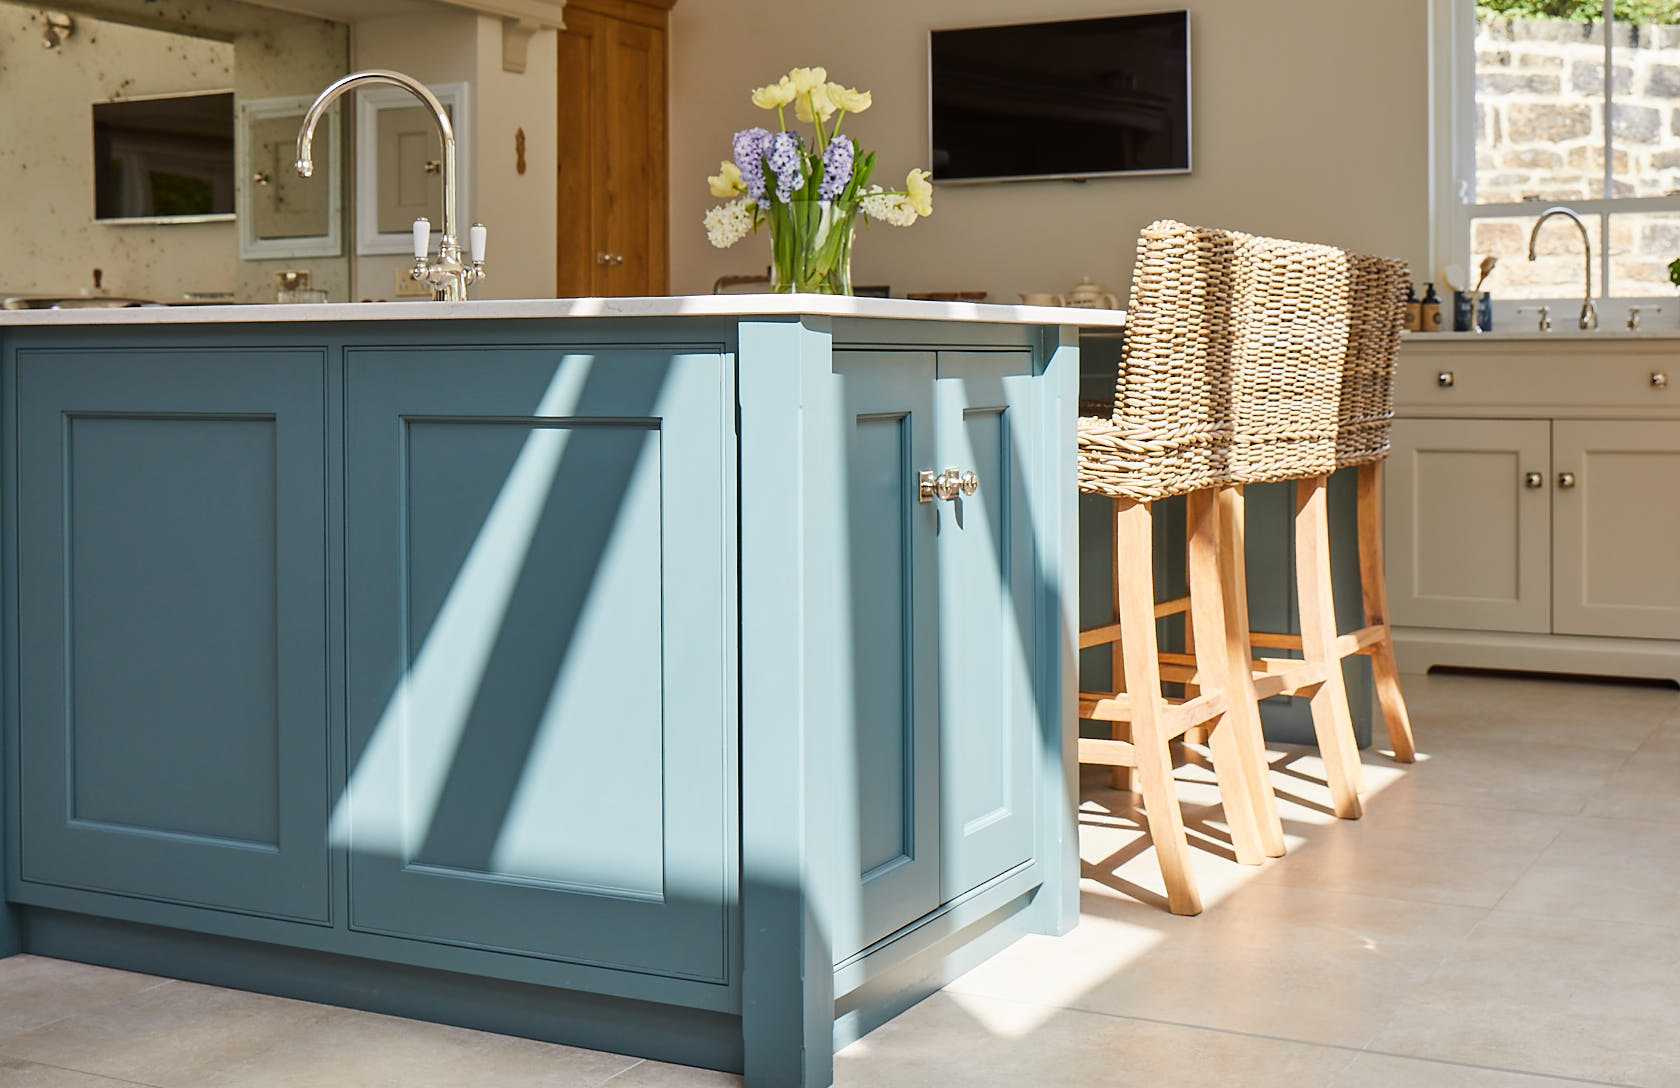 Sun shines on painted green kitchen island with wicker bar stools pushed under worktop